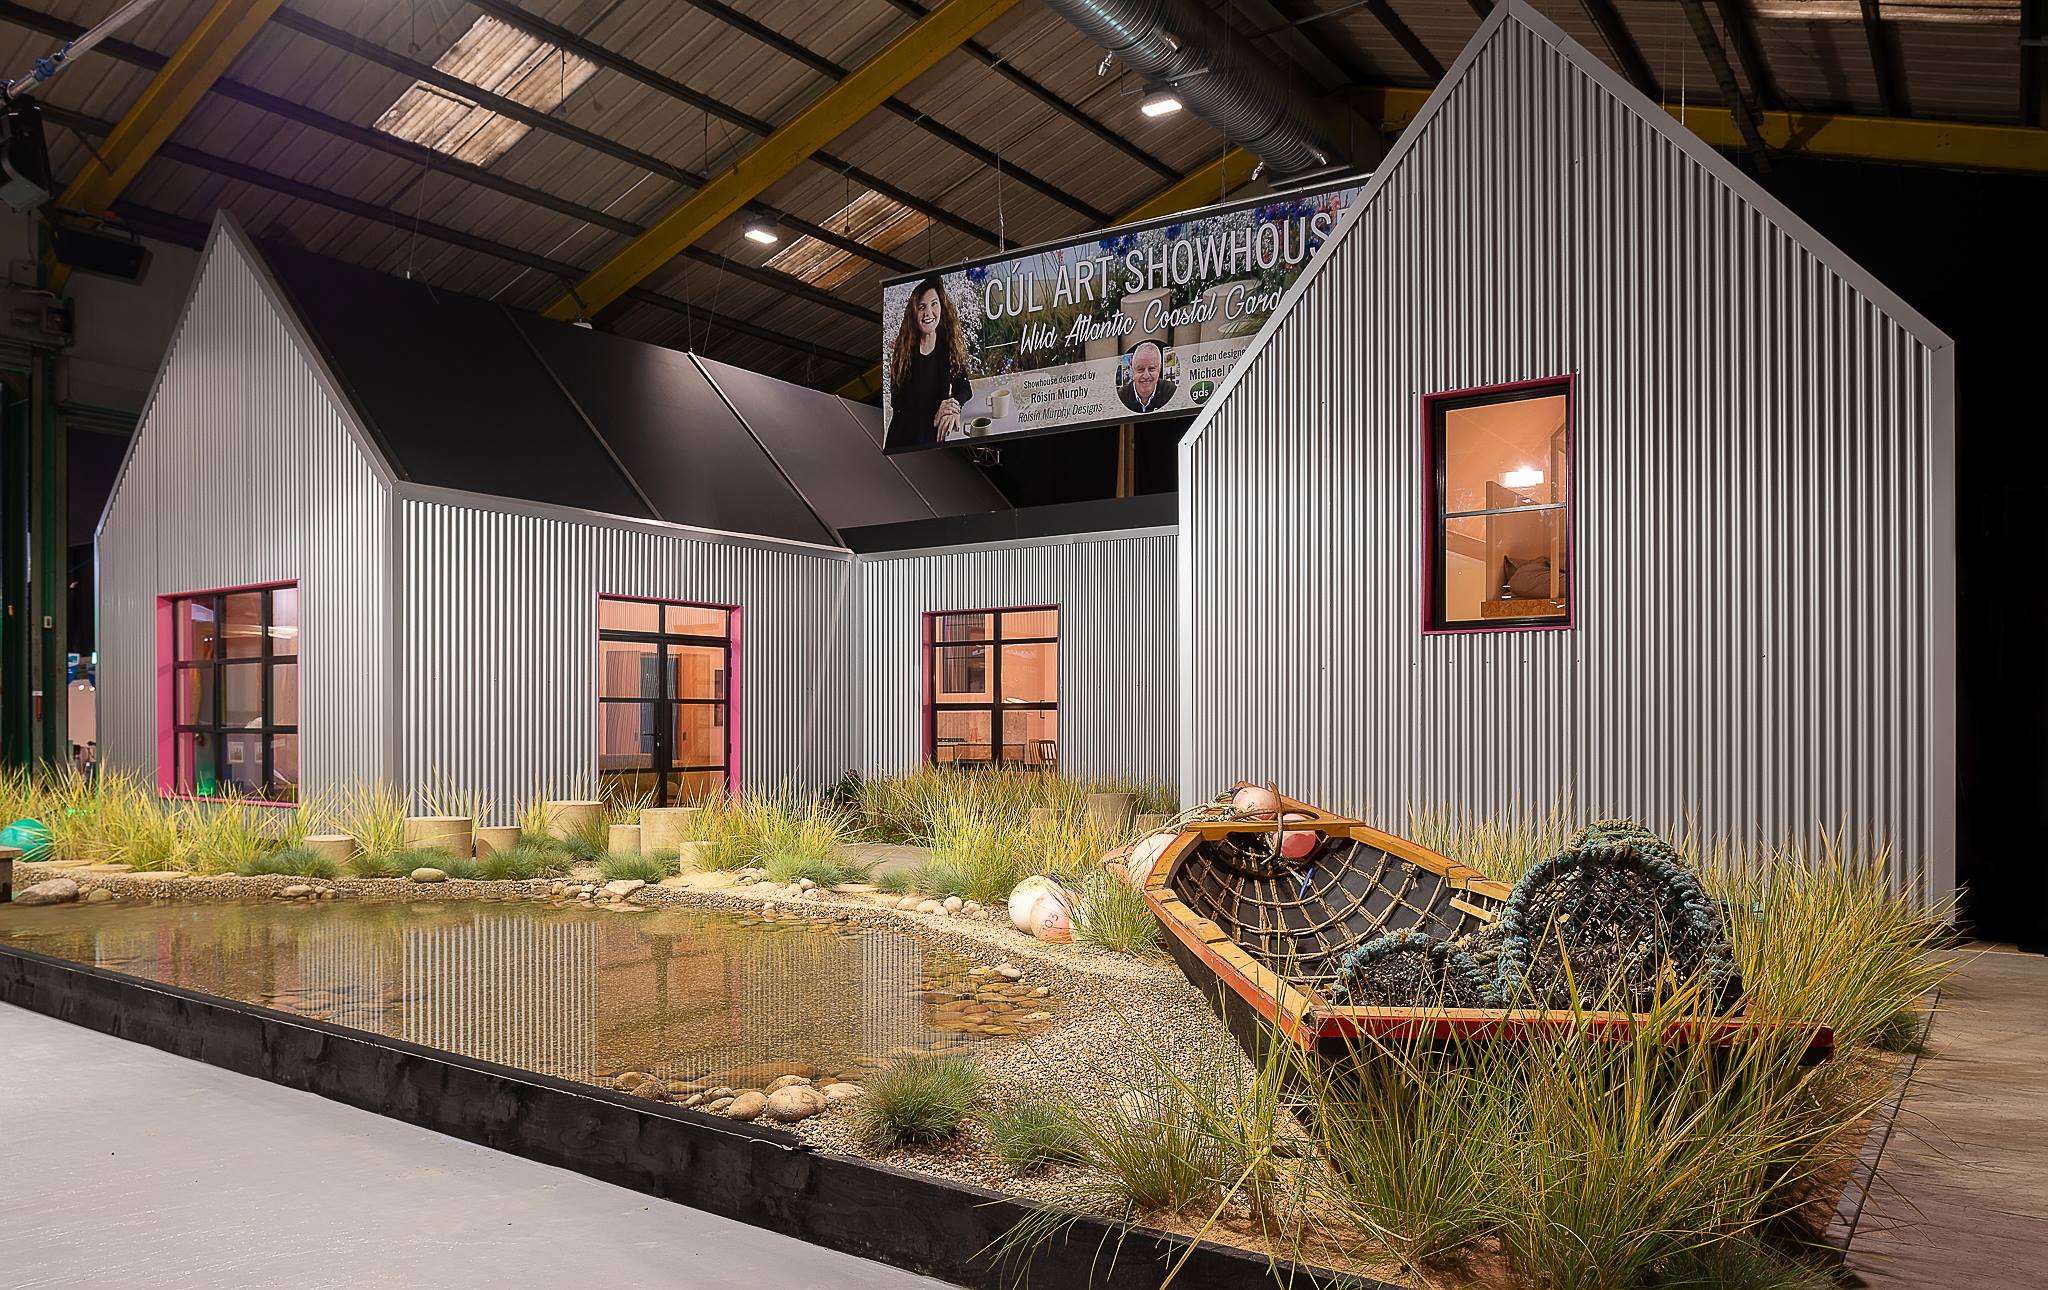 Ideal Home Show 2018 - Showhouse using EQC Profile Sheeting for wall cladding design